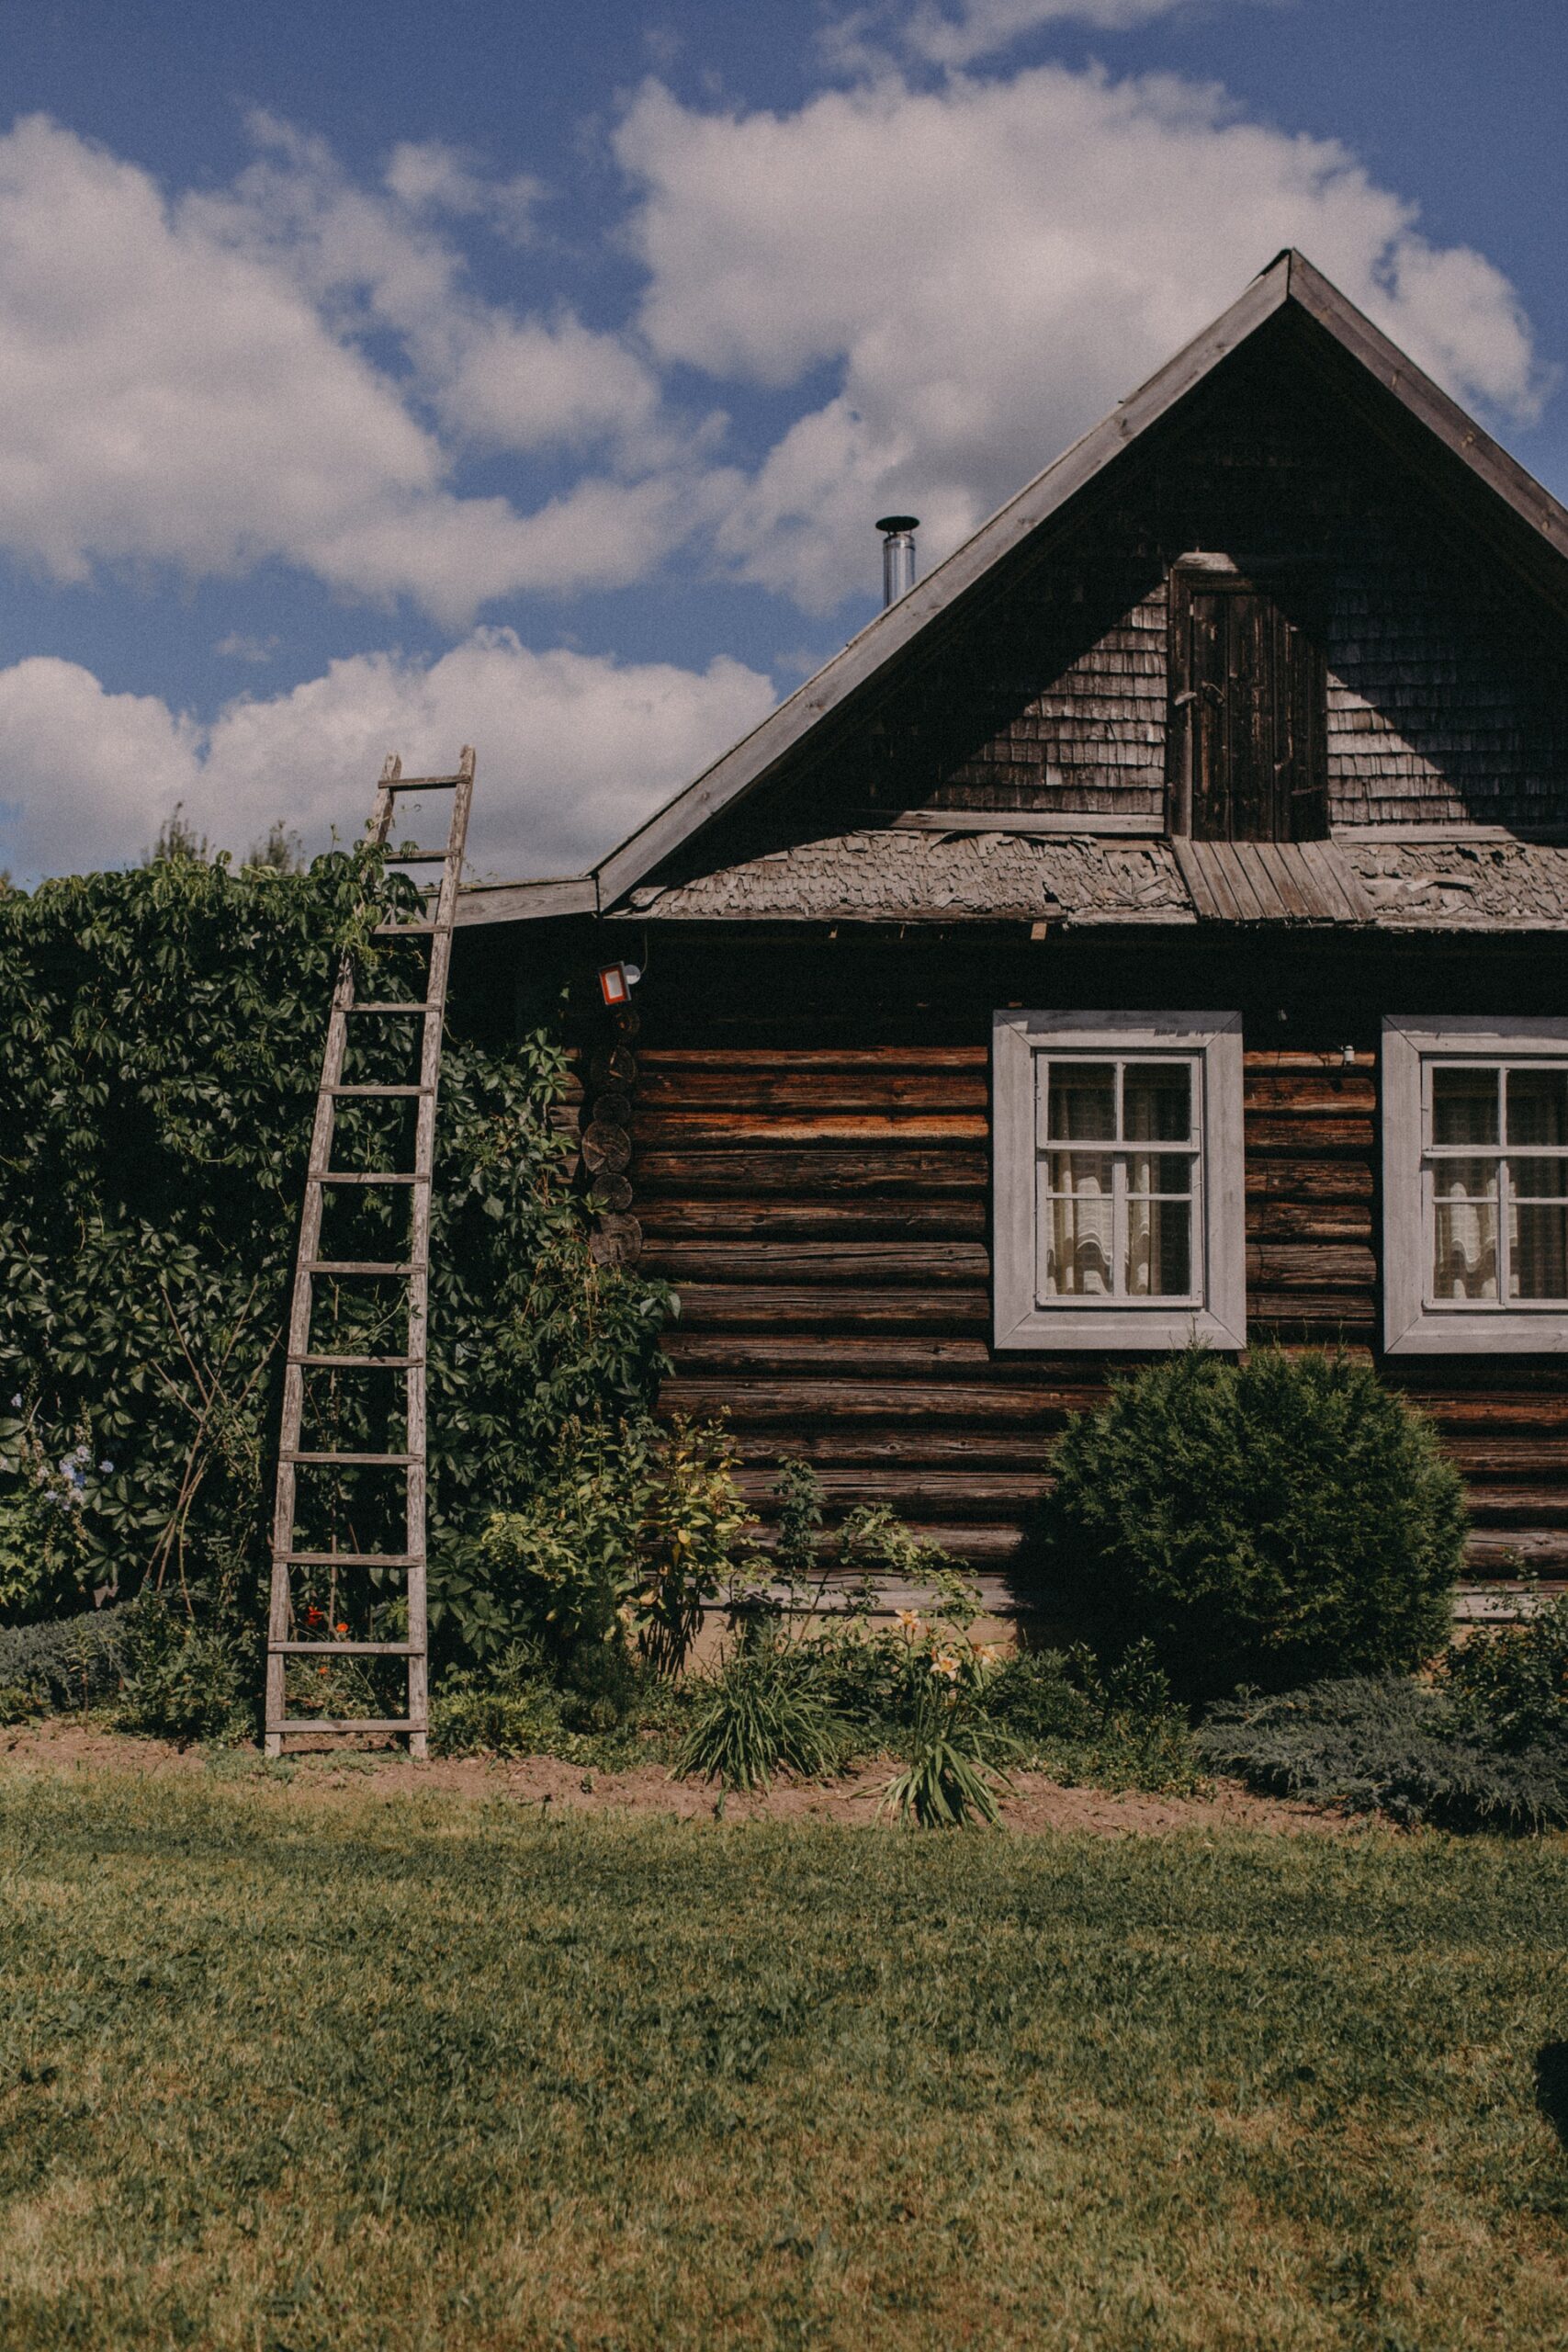 This image depicts a first-time homebuyer looking at a home with a ladder placed outside. This is to give the idea that zero-deposit mortgages are creating opportunities for them.